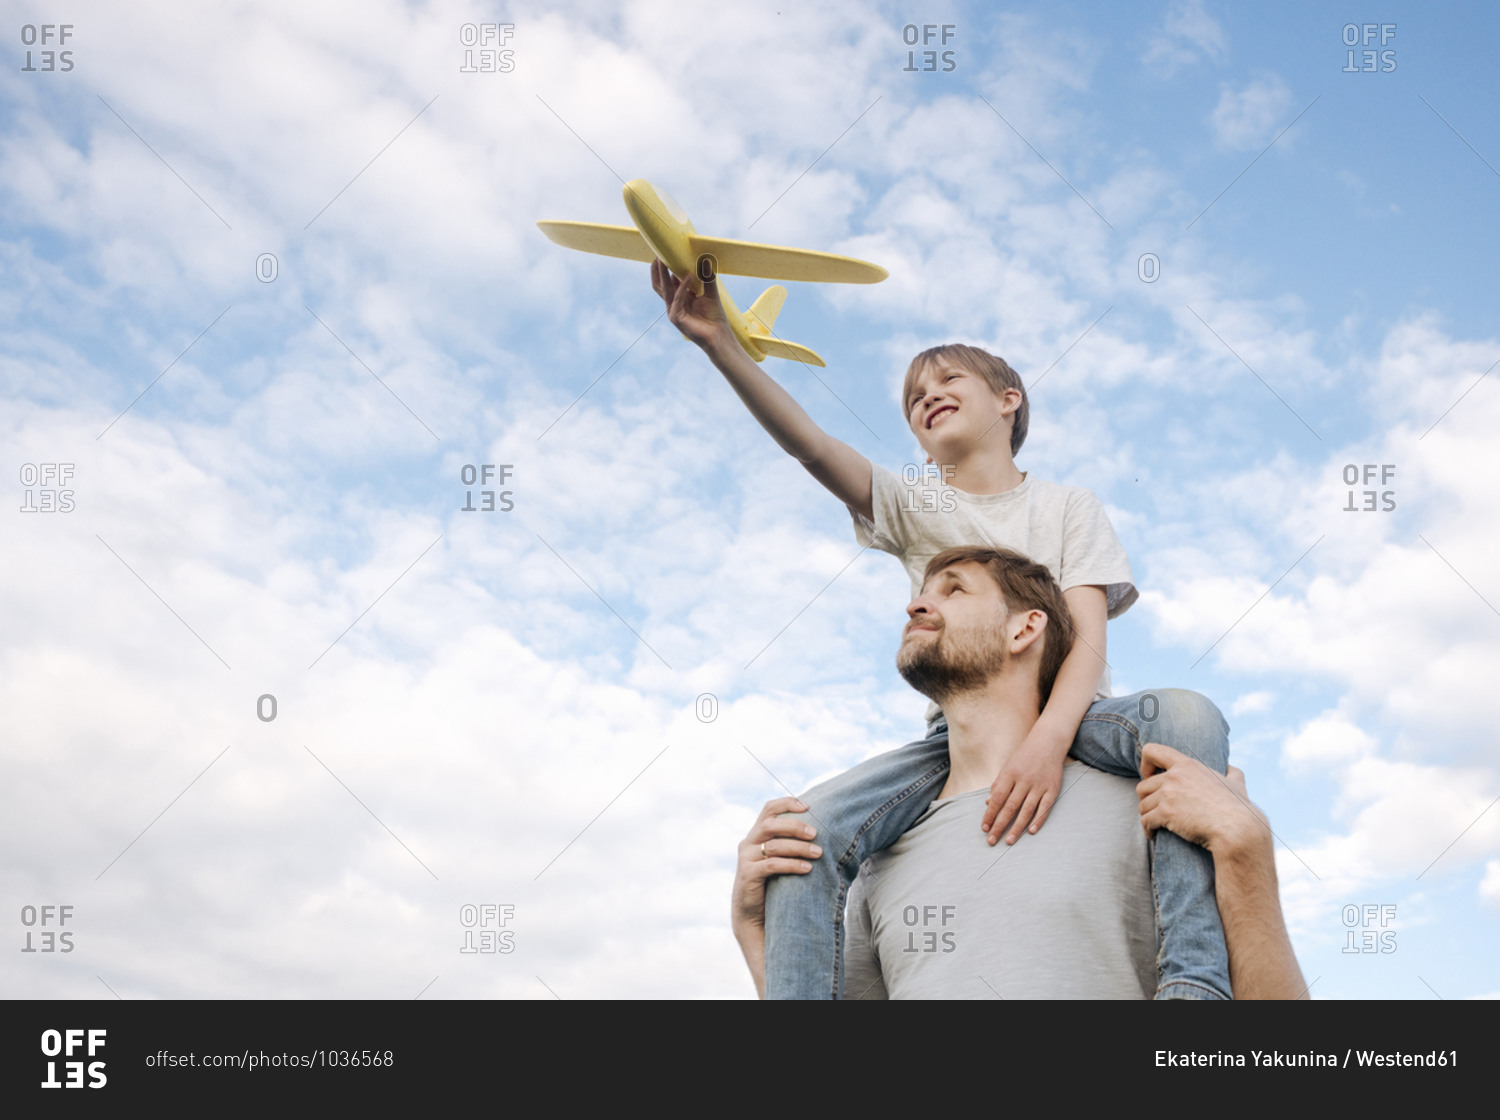 Man carrying son on shoulders playing with toy airplane against sky